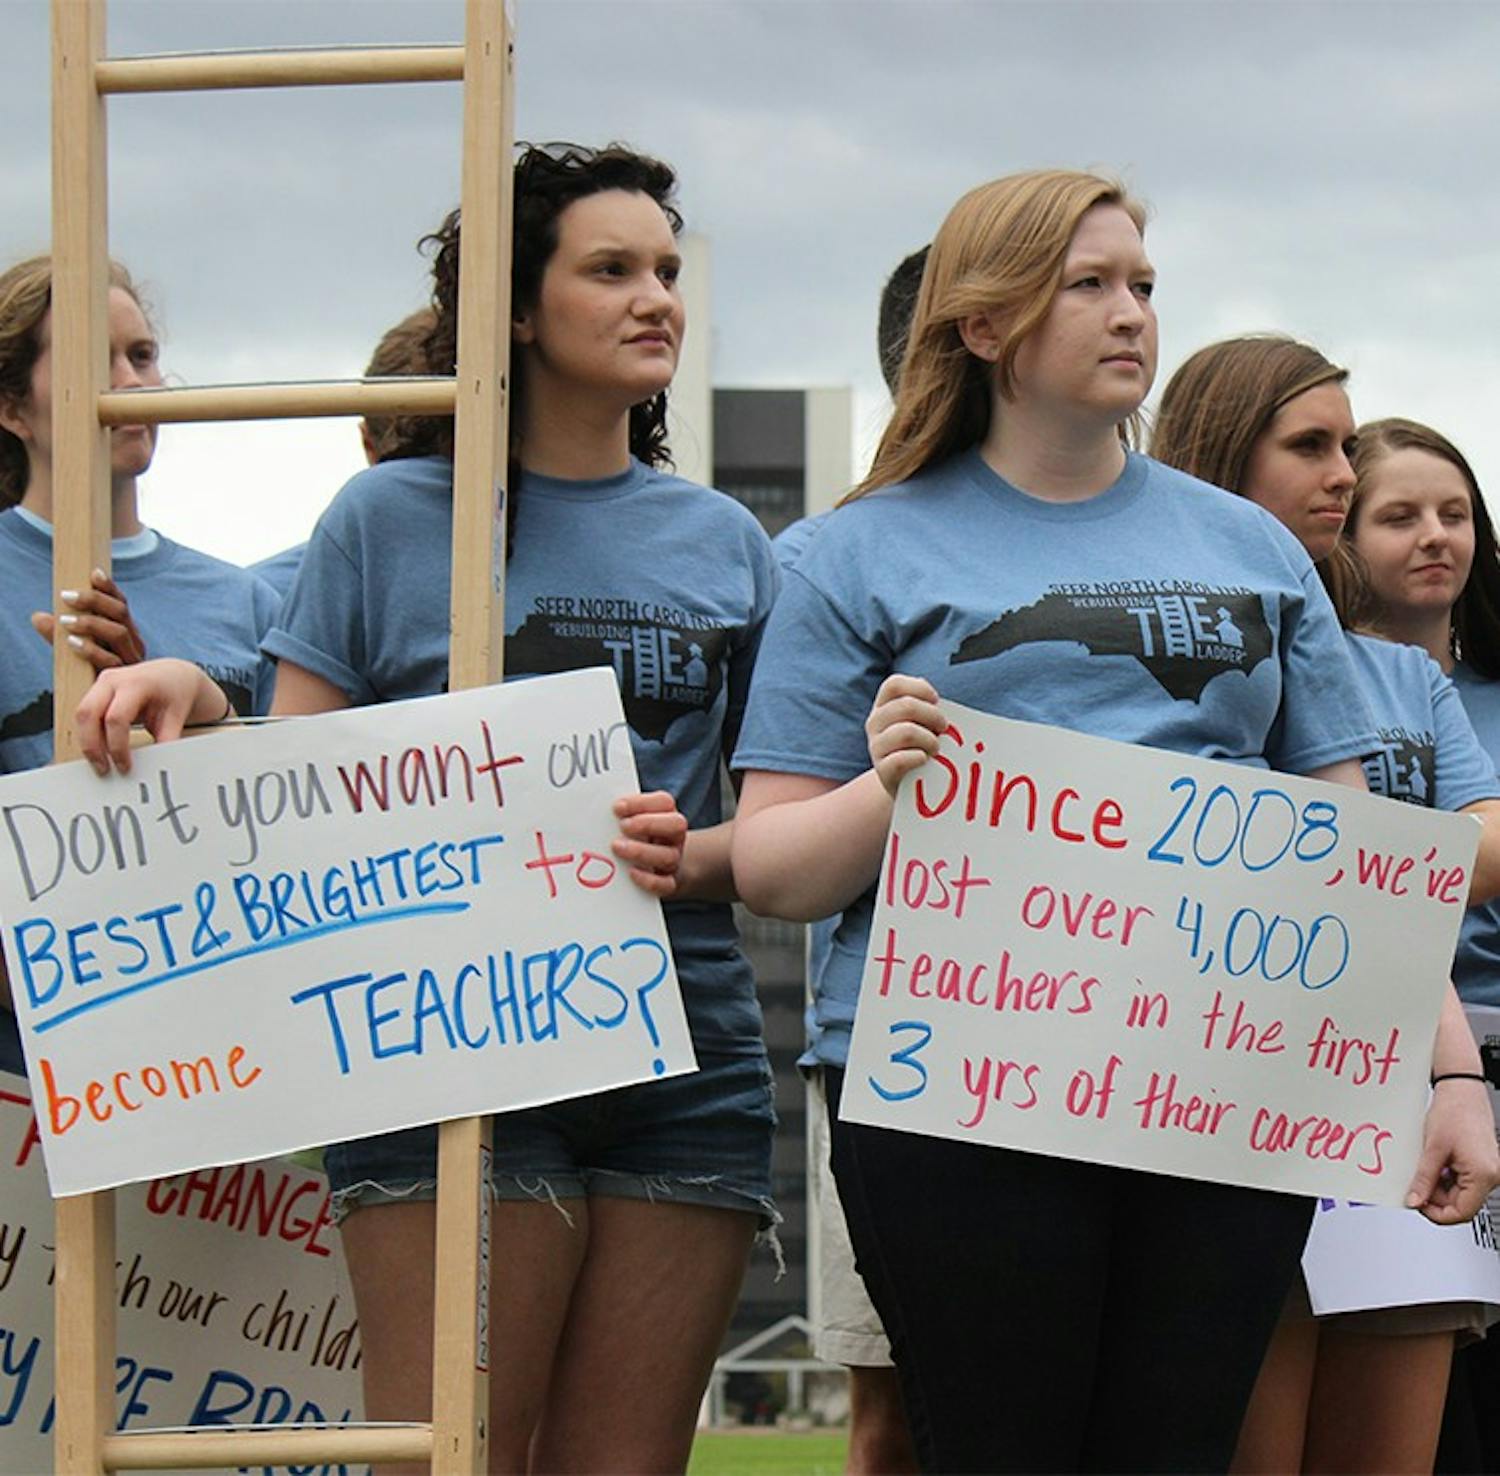 Students for Education Reform gathered outside of the General Assembly Building in Raleigh in 2014, calling for a raise in wages for teachers and a new respect for the job. SFER consists of college students from all over the state, including Duke, East Carolina, UNC-CH, and Wake Forest.&nbsp;